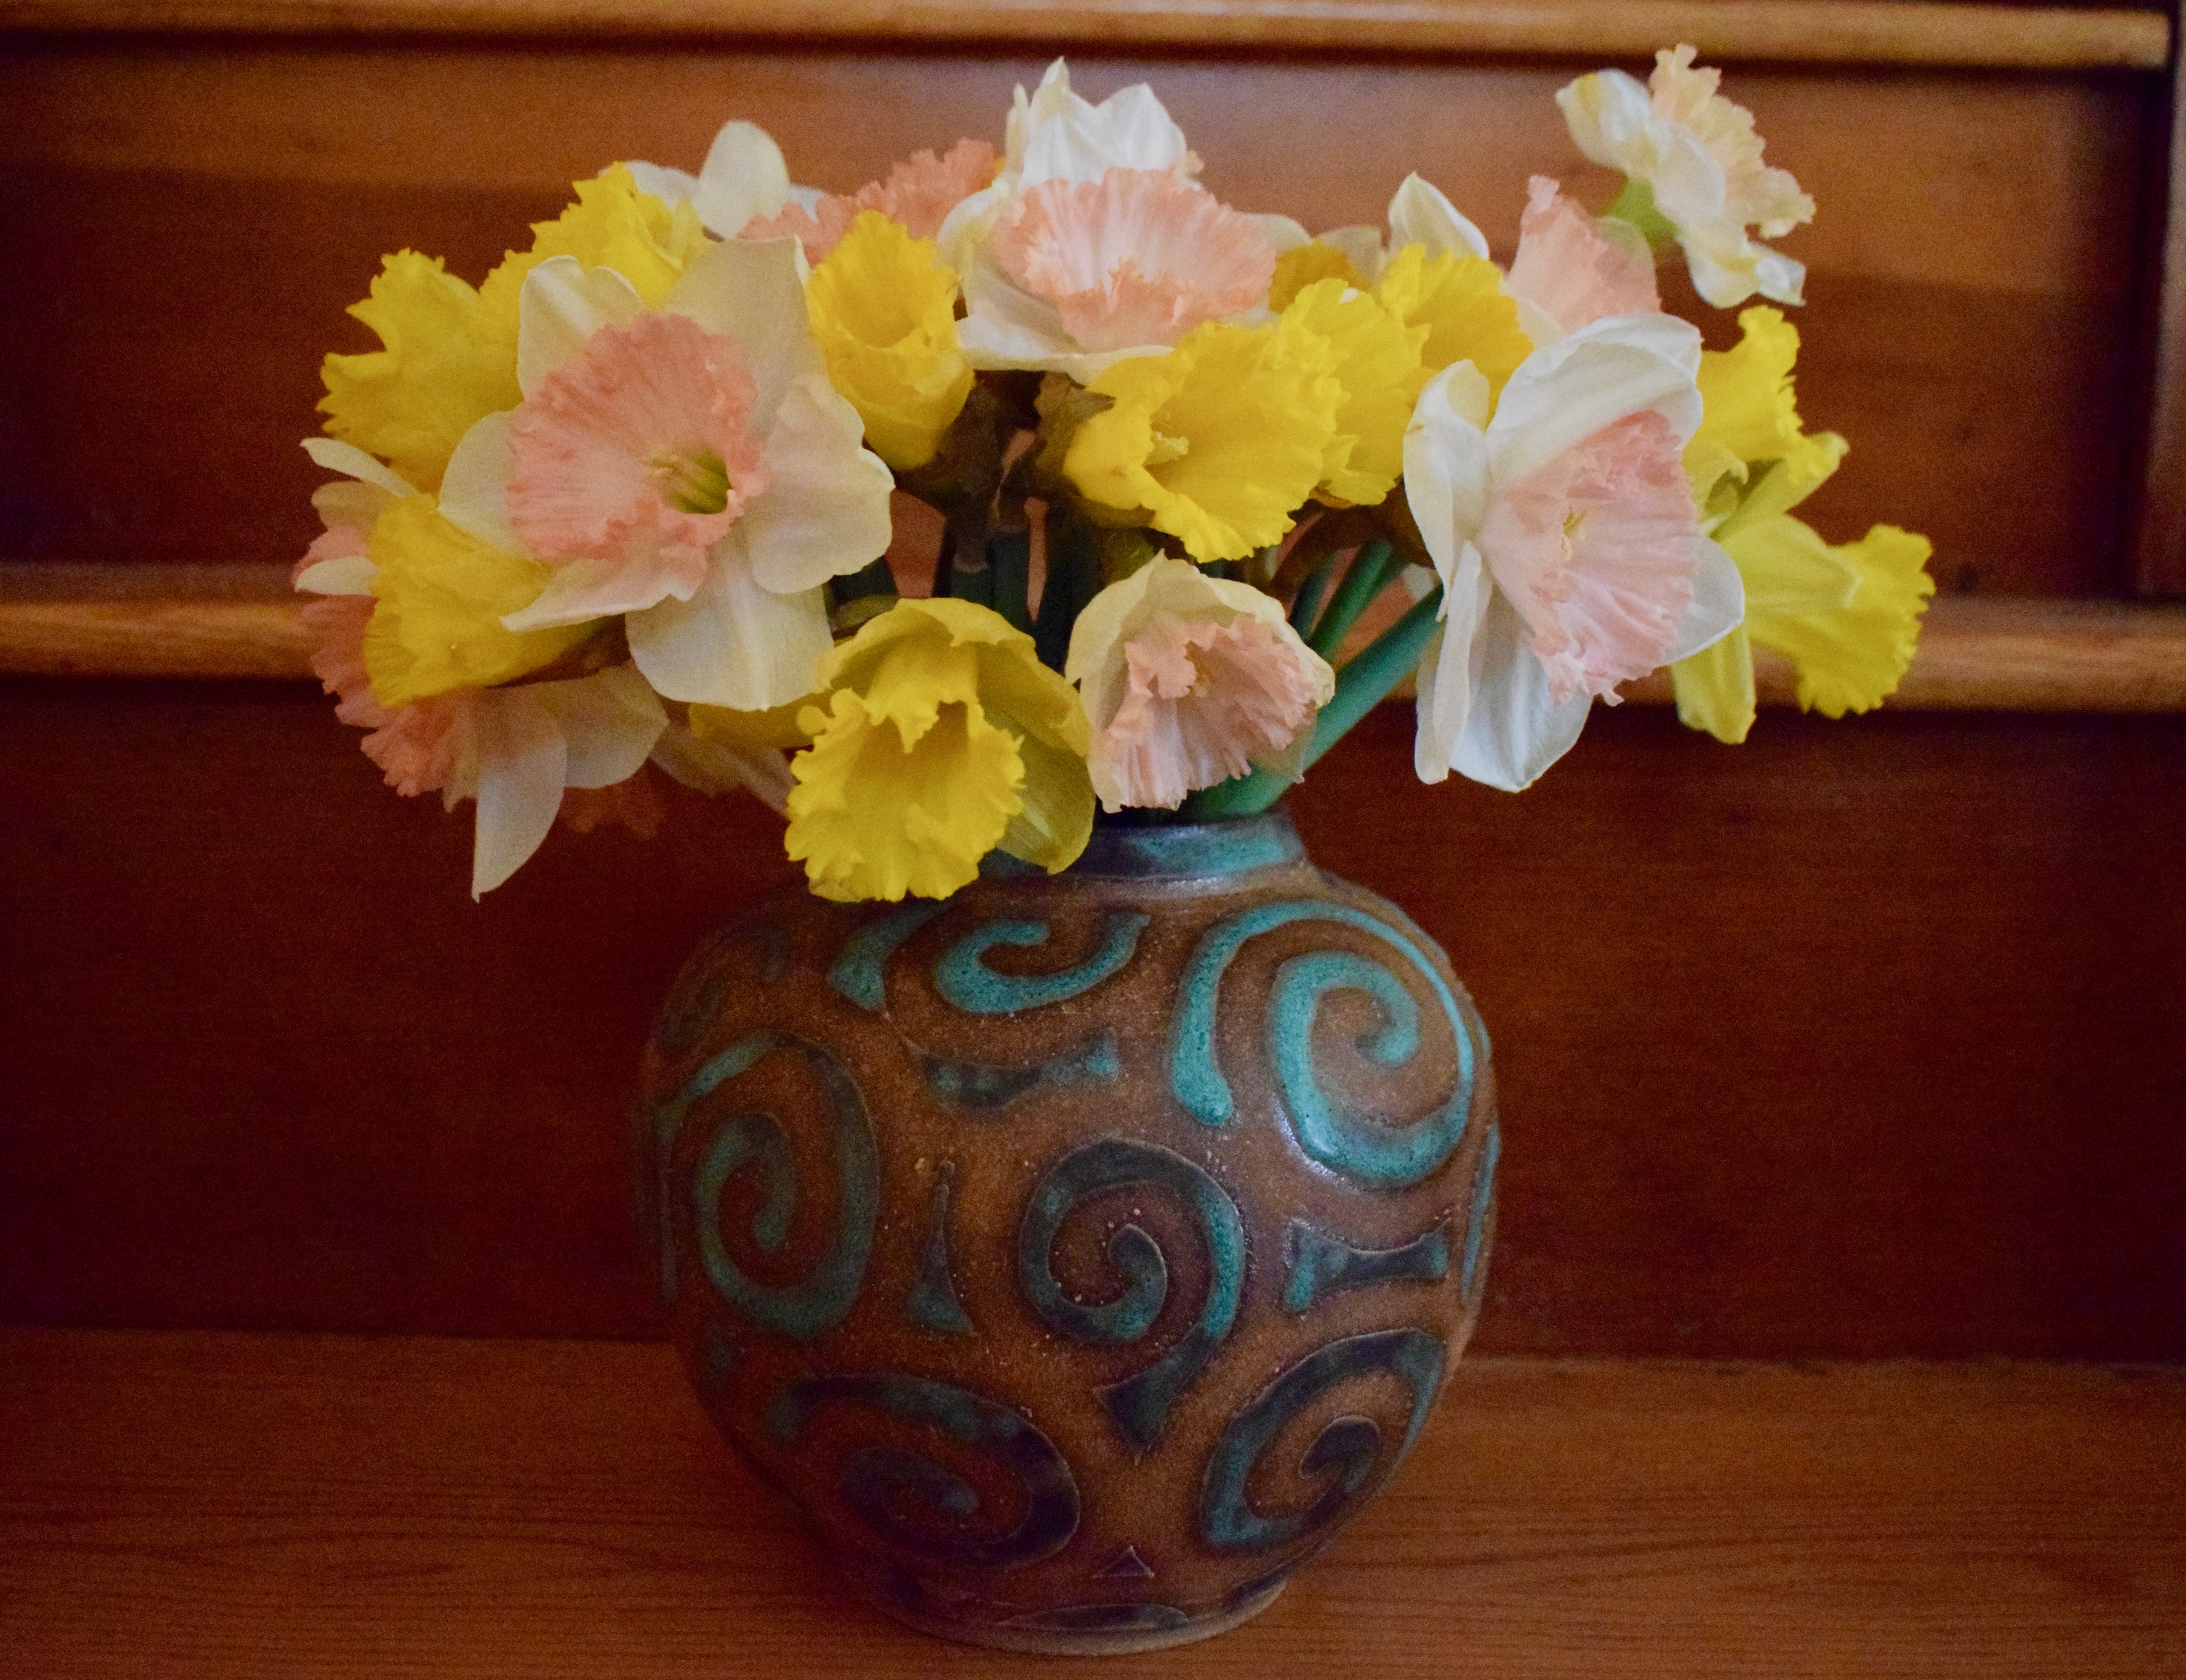 It's the Weekend!, Number 98, Daffodils in a Pottery Vase